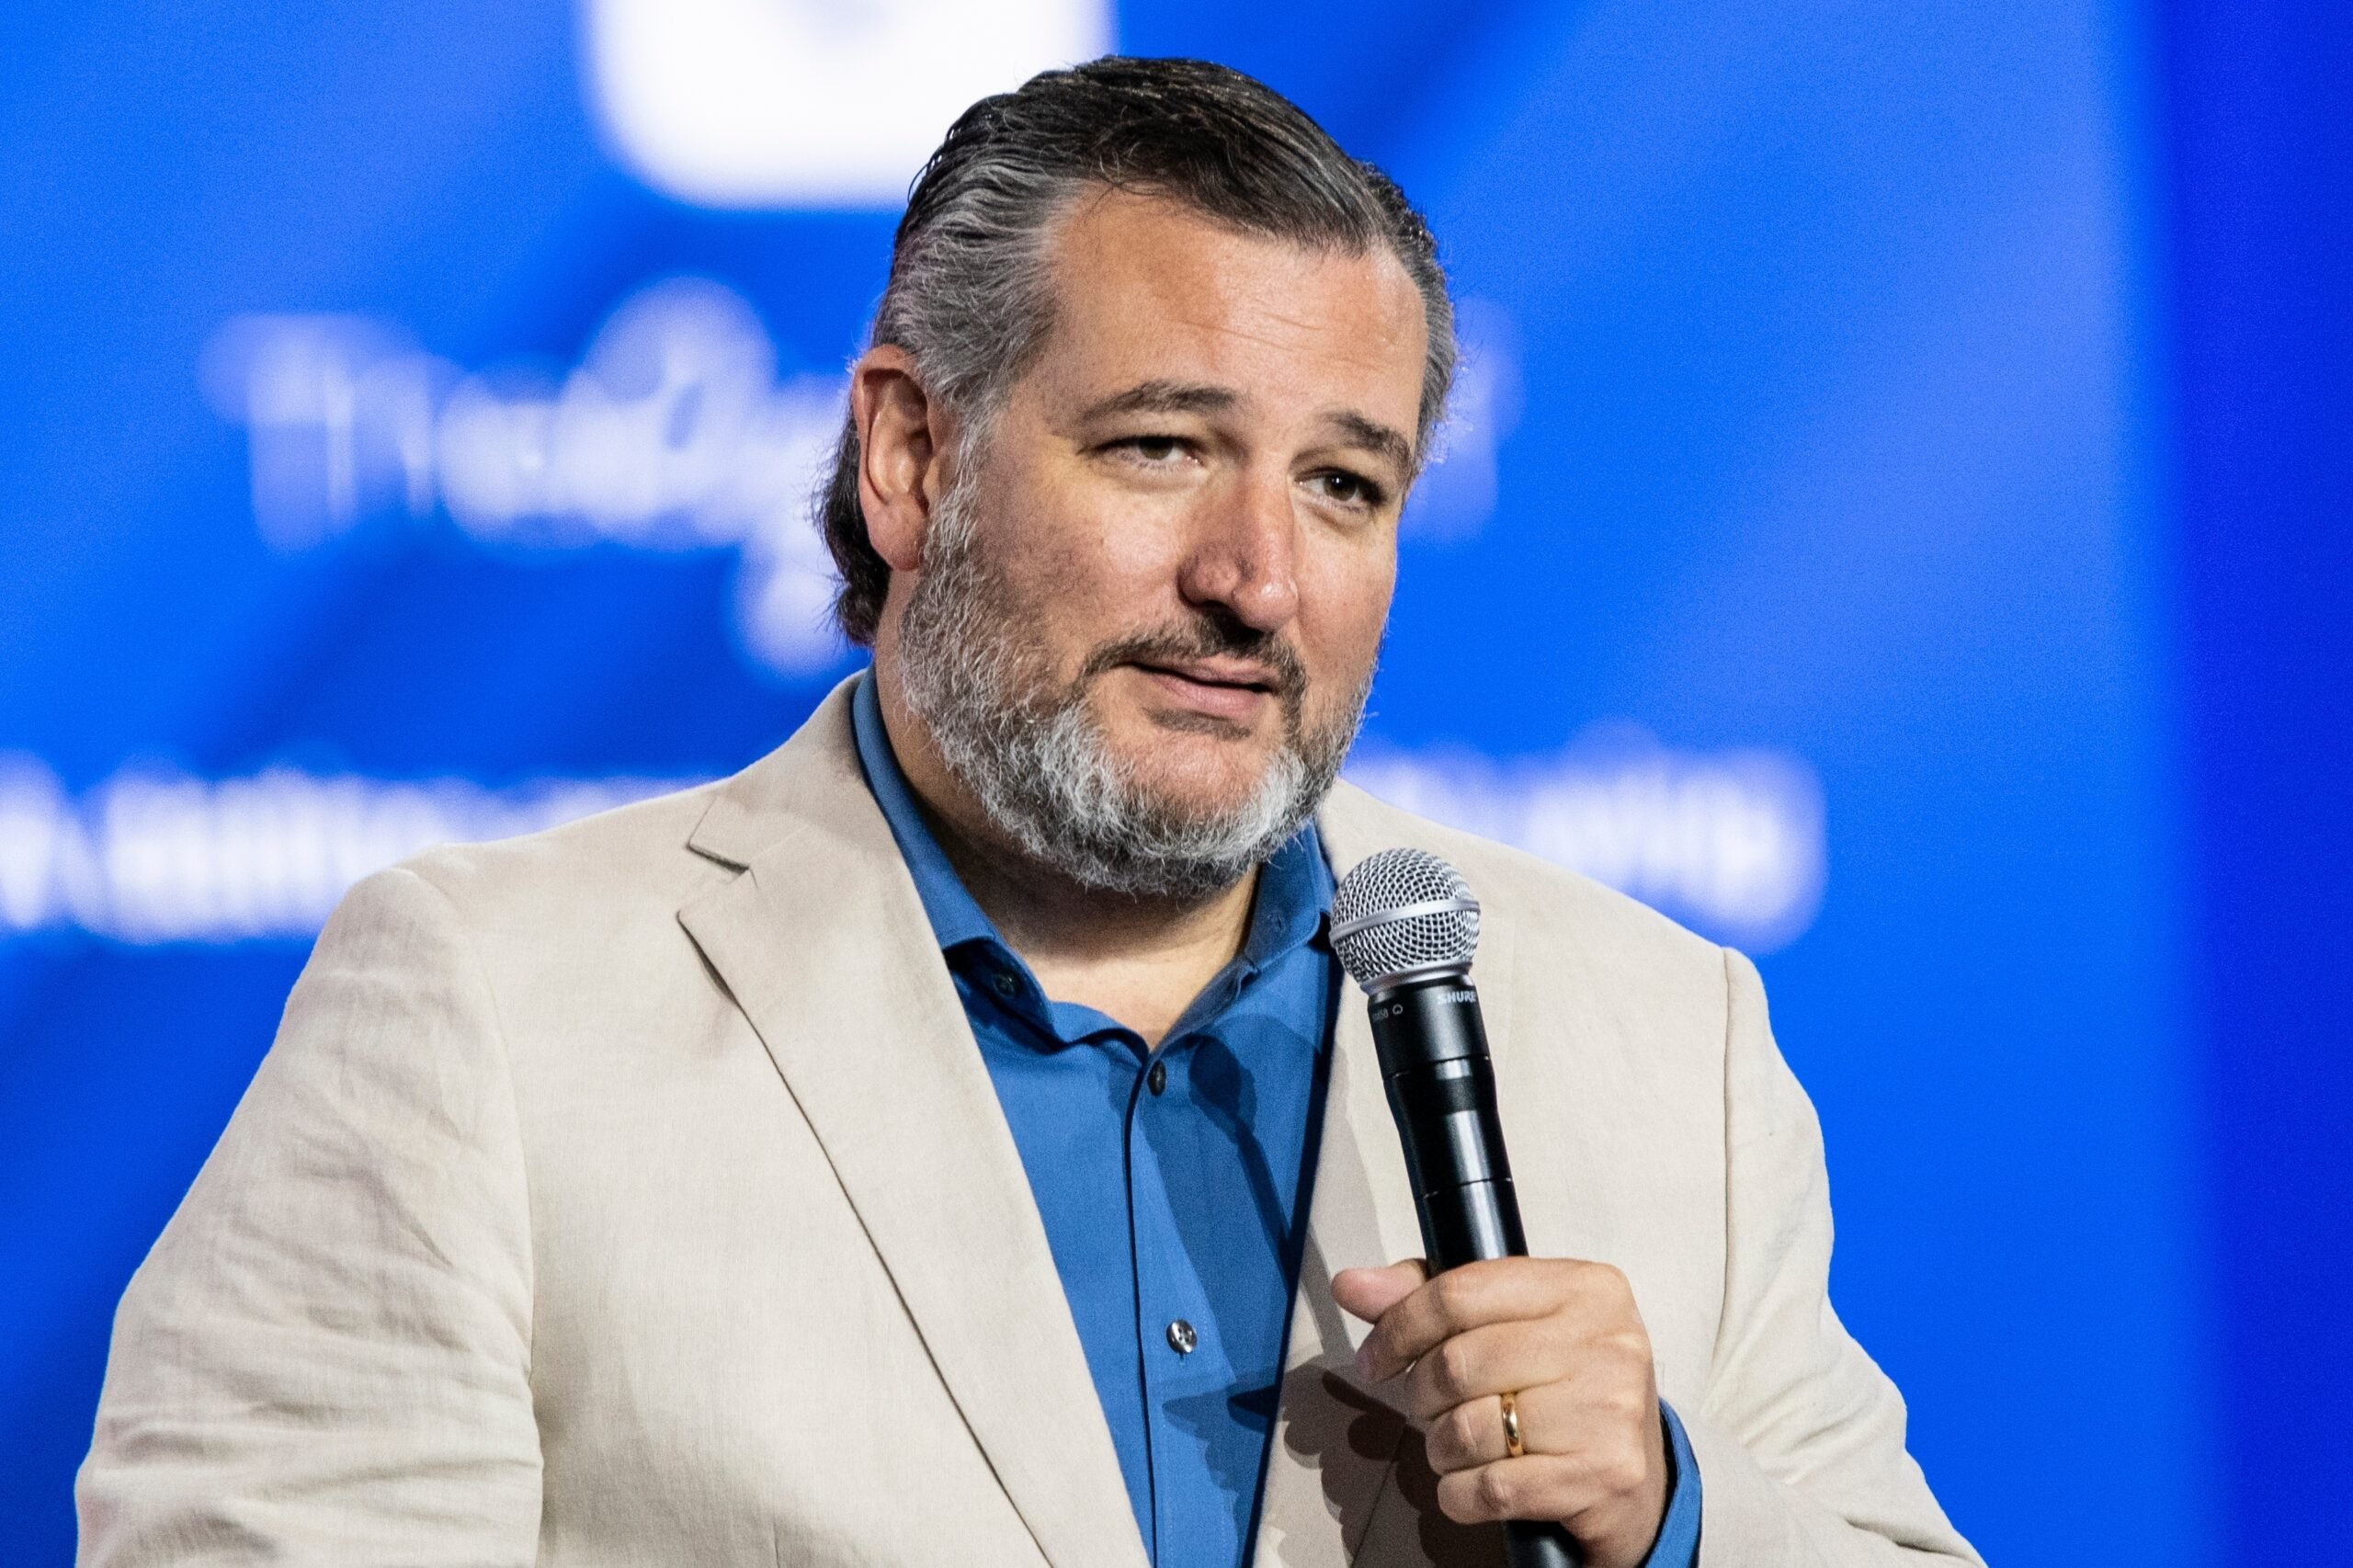 Ted Cruz, wearing a light suit jacket over a blue button-down, speaks into a microphone at CPAC in Dallas.